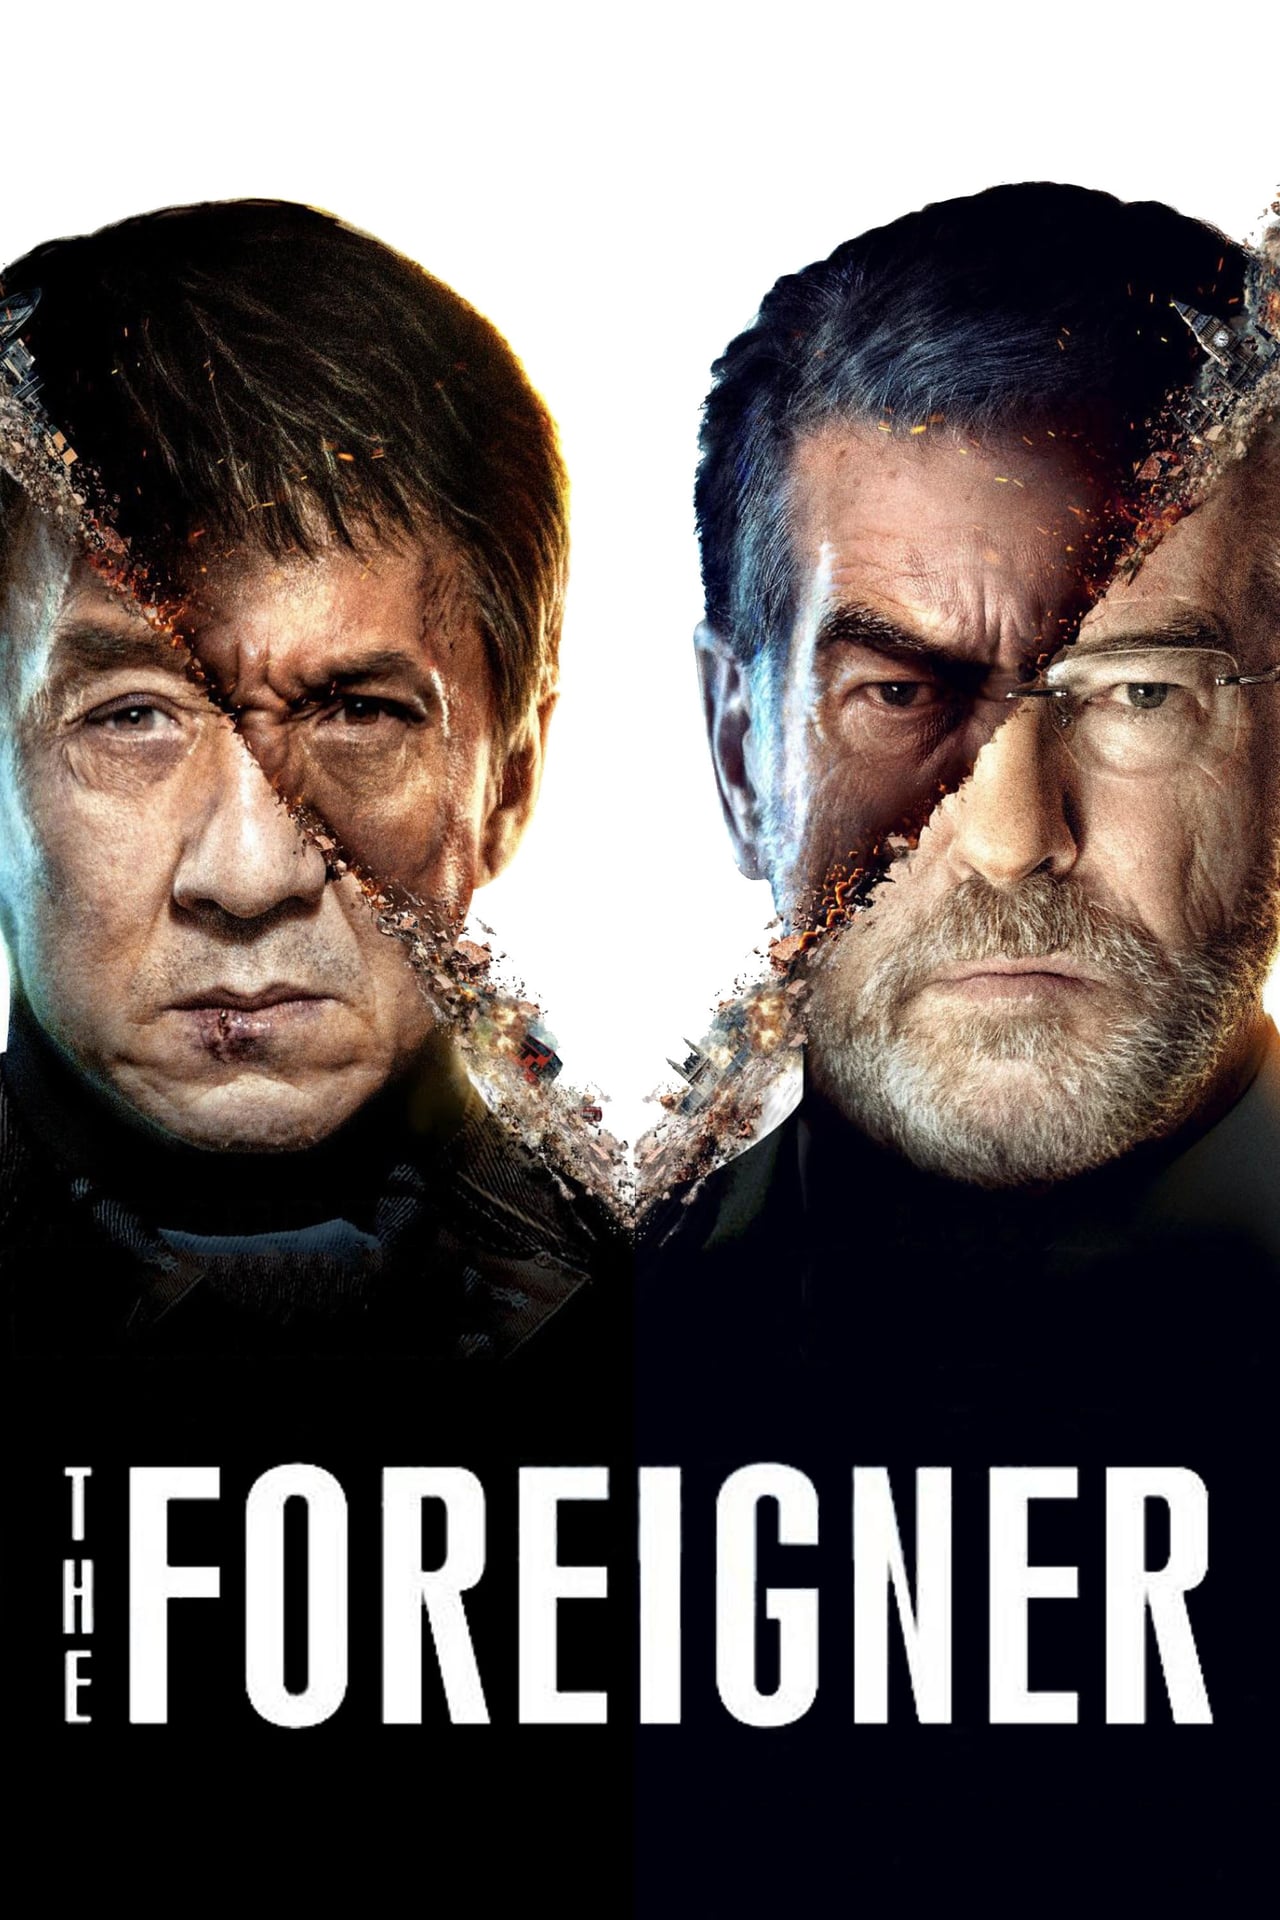 the foreigner cast